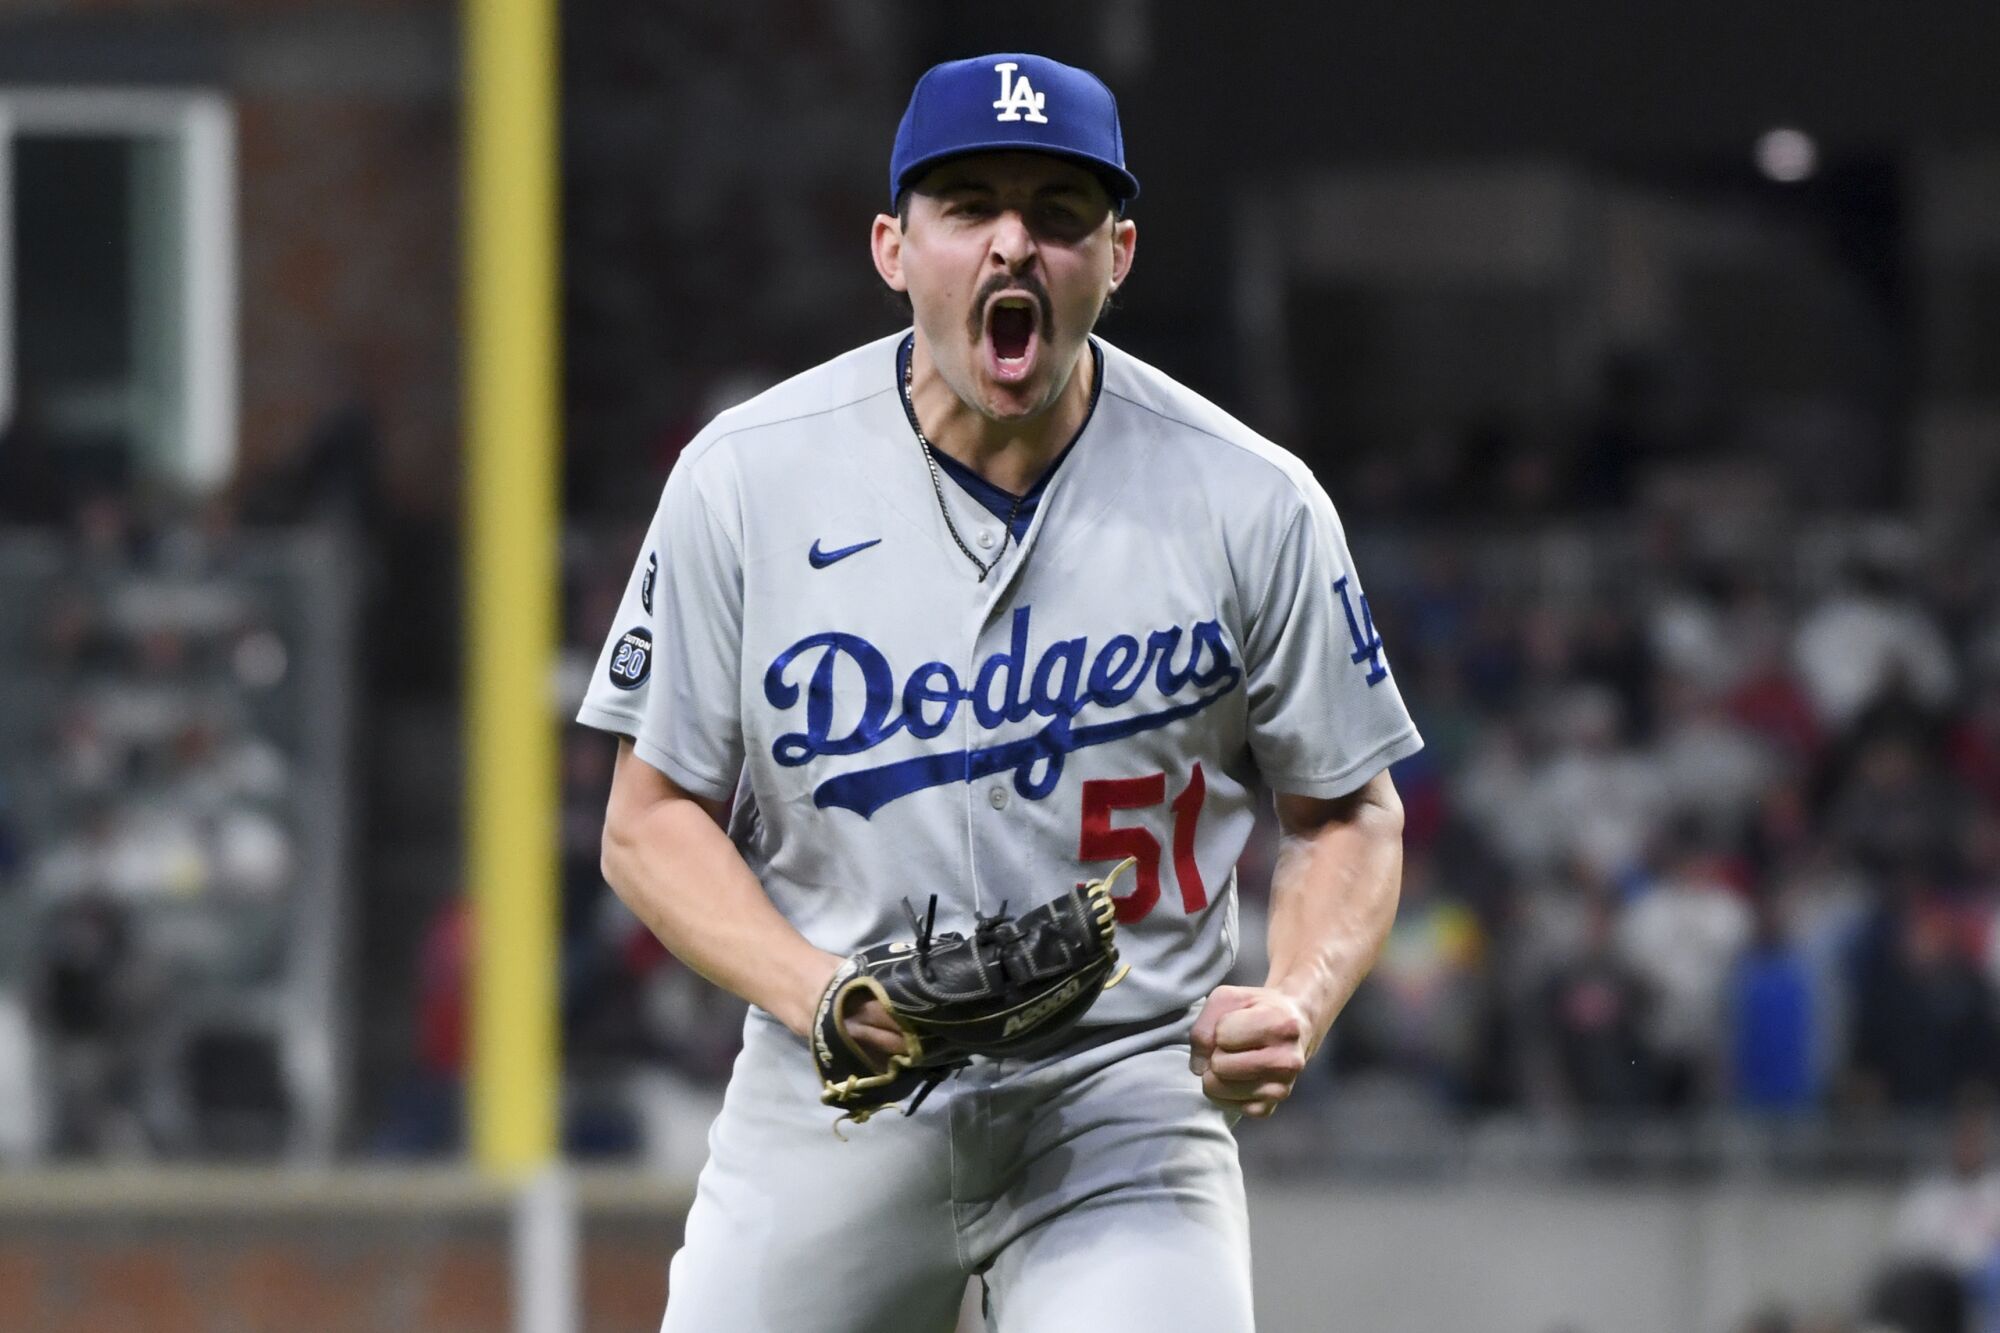 Dodgers reliever Alex Vesia lets out a cry after retiring in a playoff game last season.